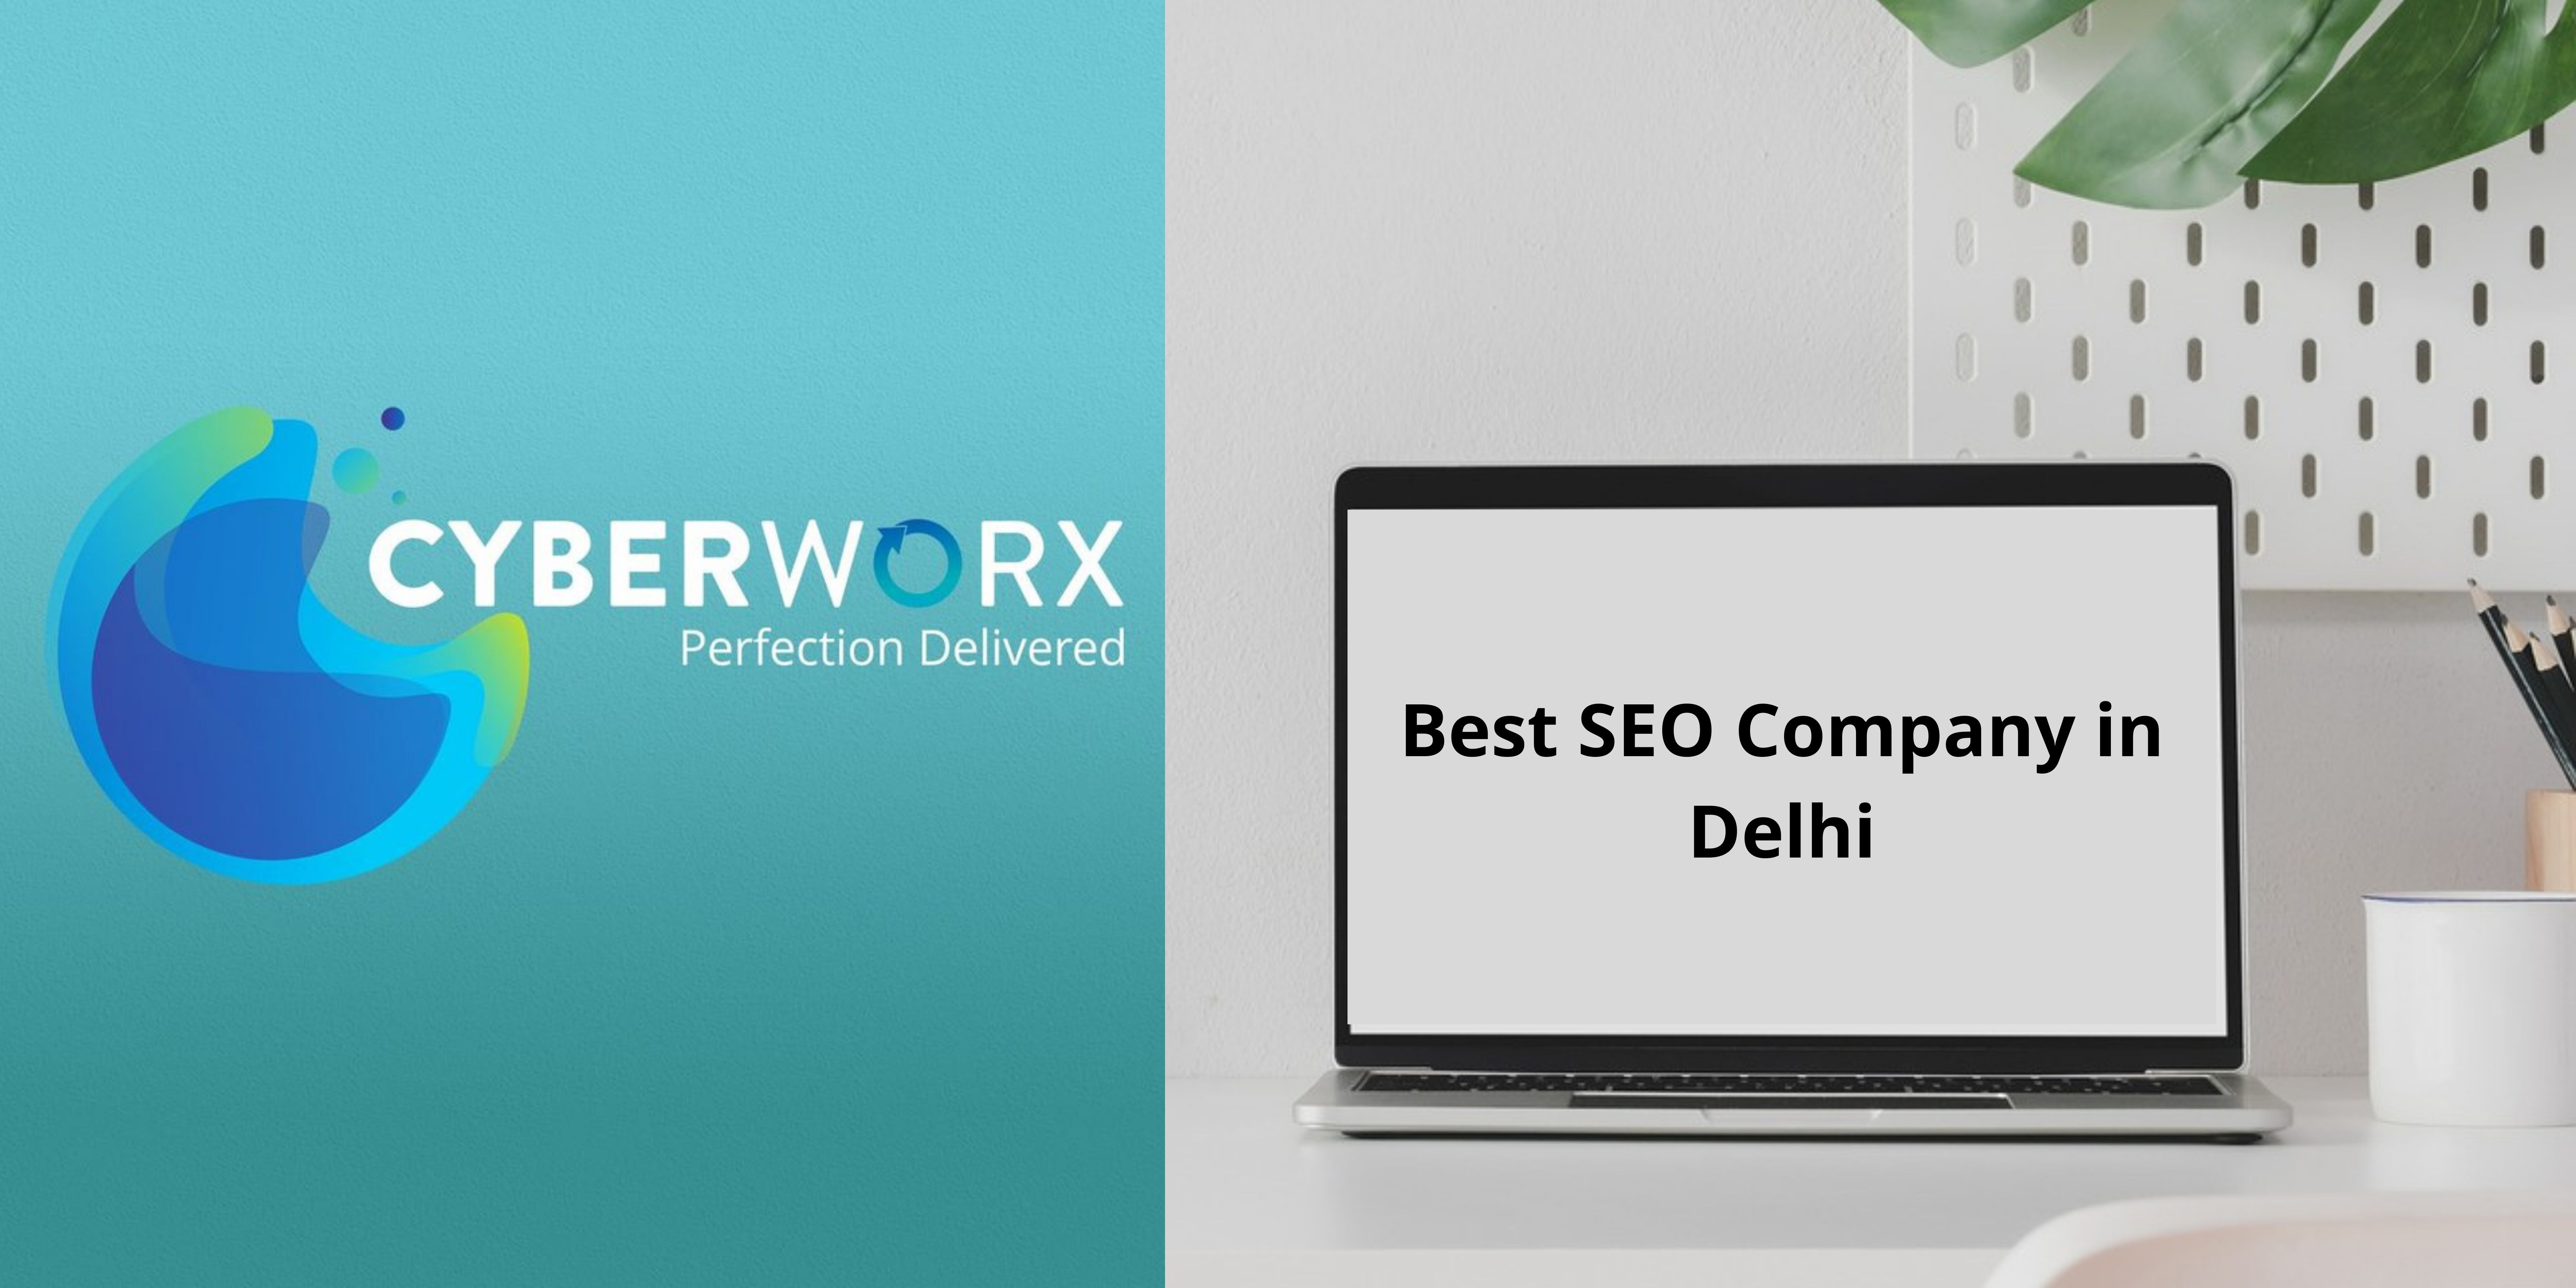 Best SEO Company in Delhi and Affordable SEO Services